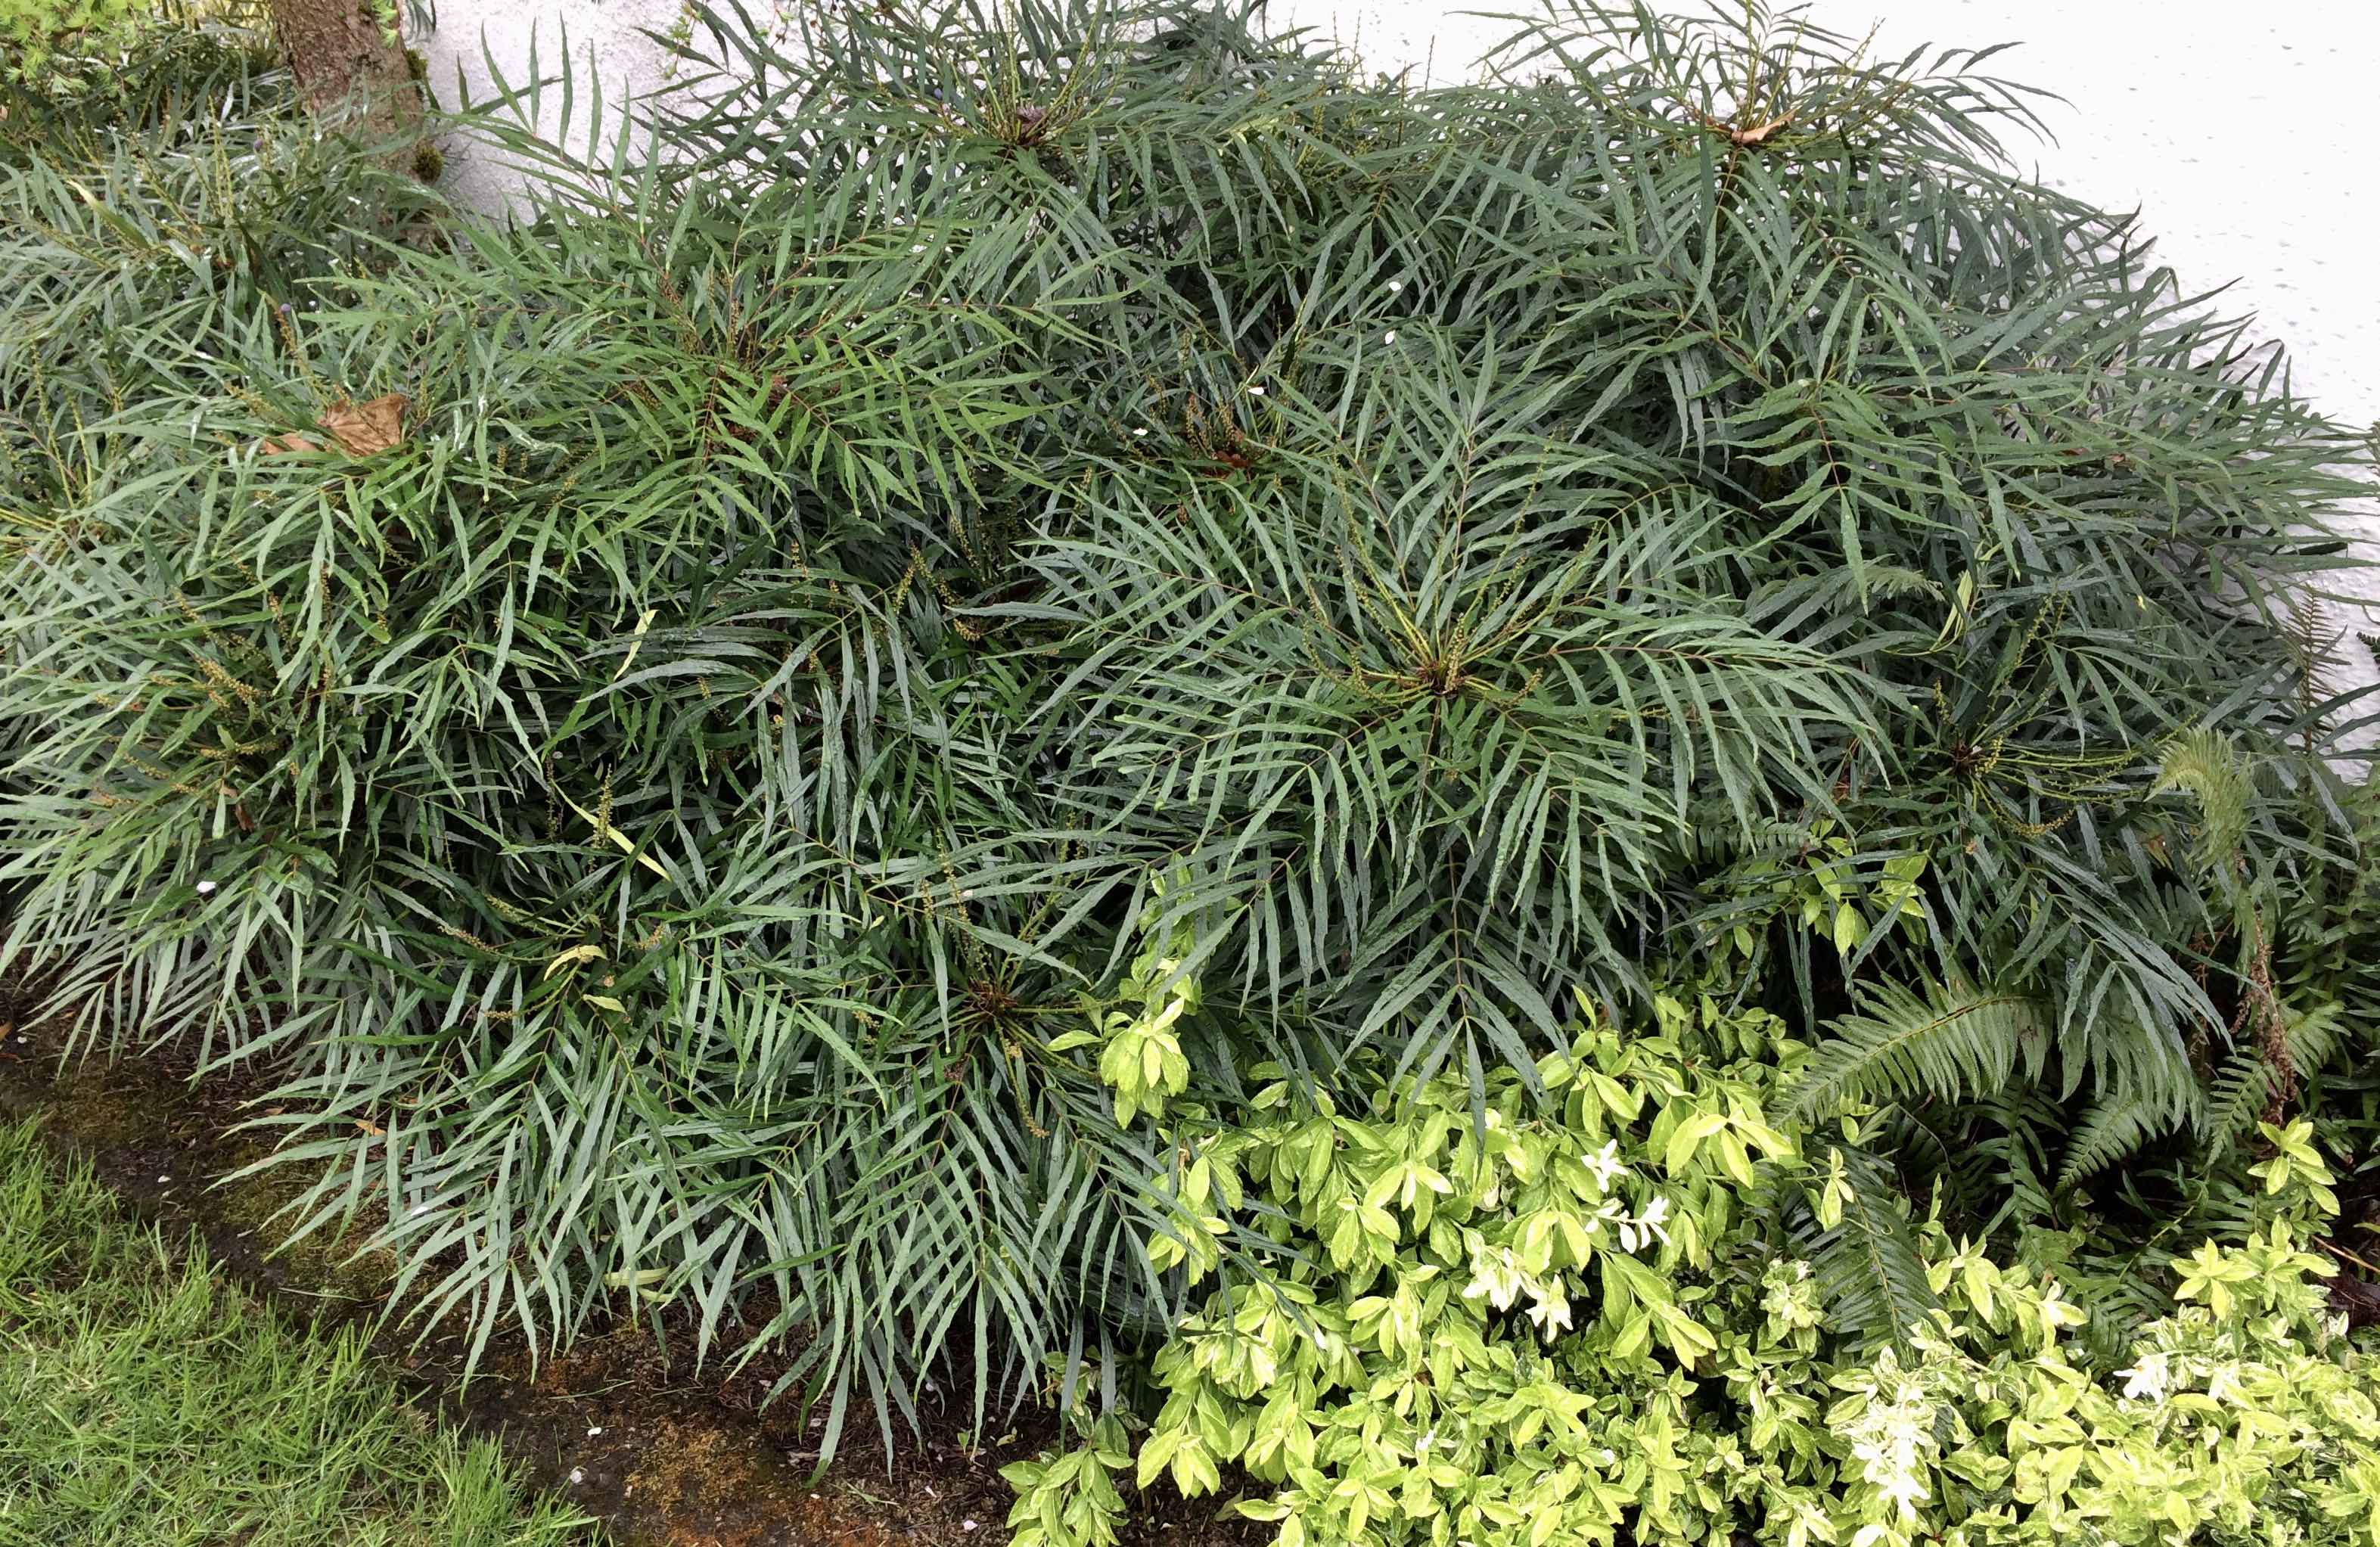 Soft Caress Mahonia, a compact clumping evergreen shrub, is recommended by Bruce Hegna of Nature/Nurture Landscape Design.